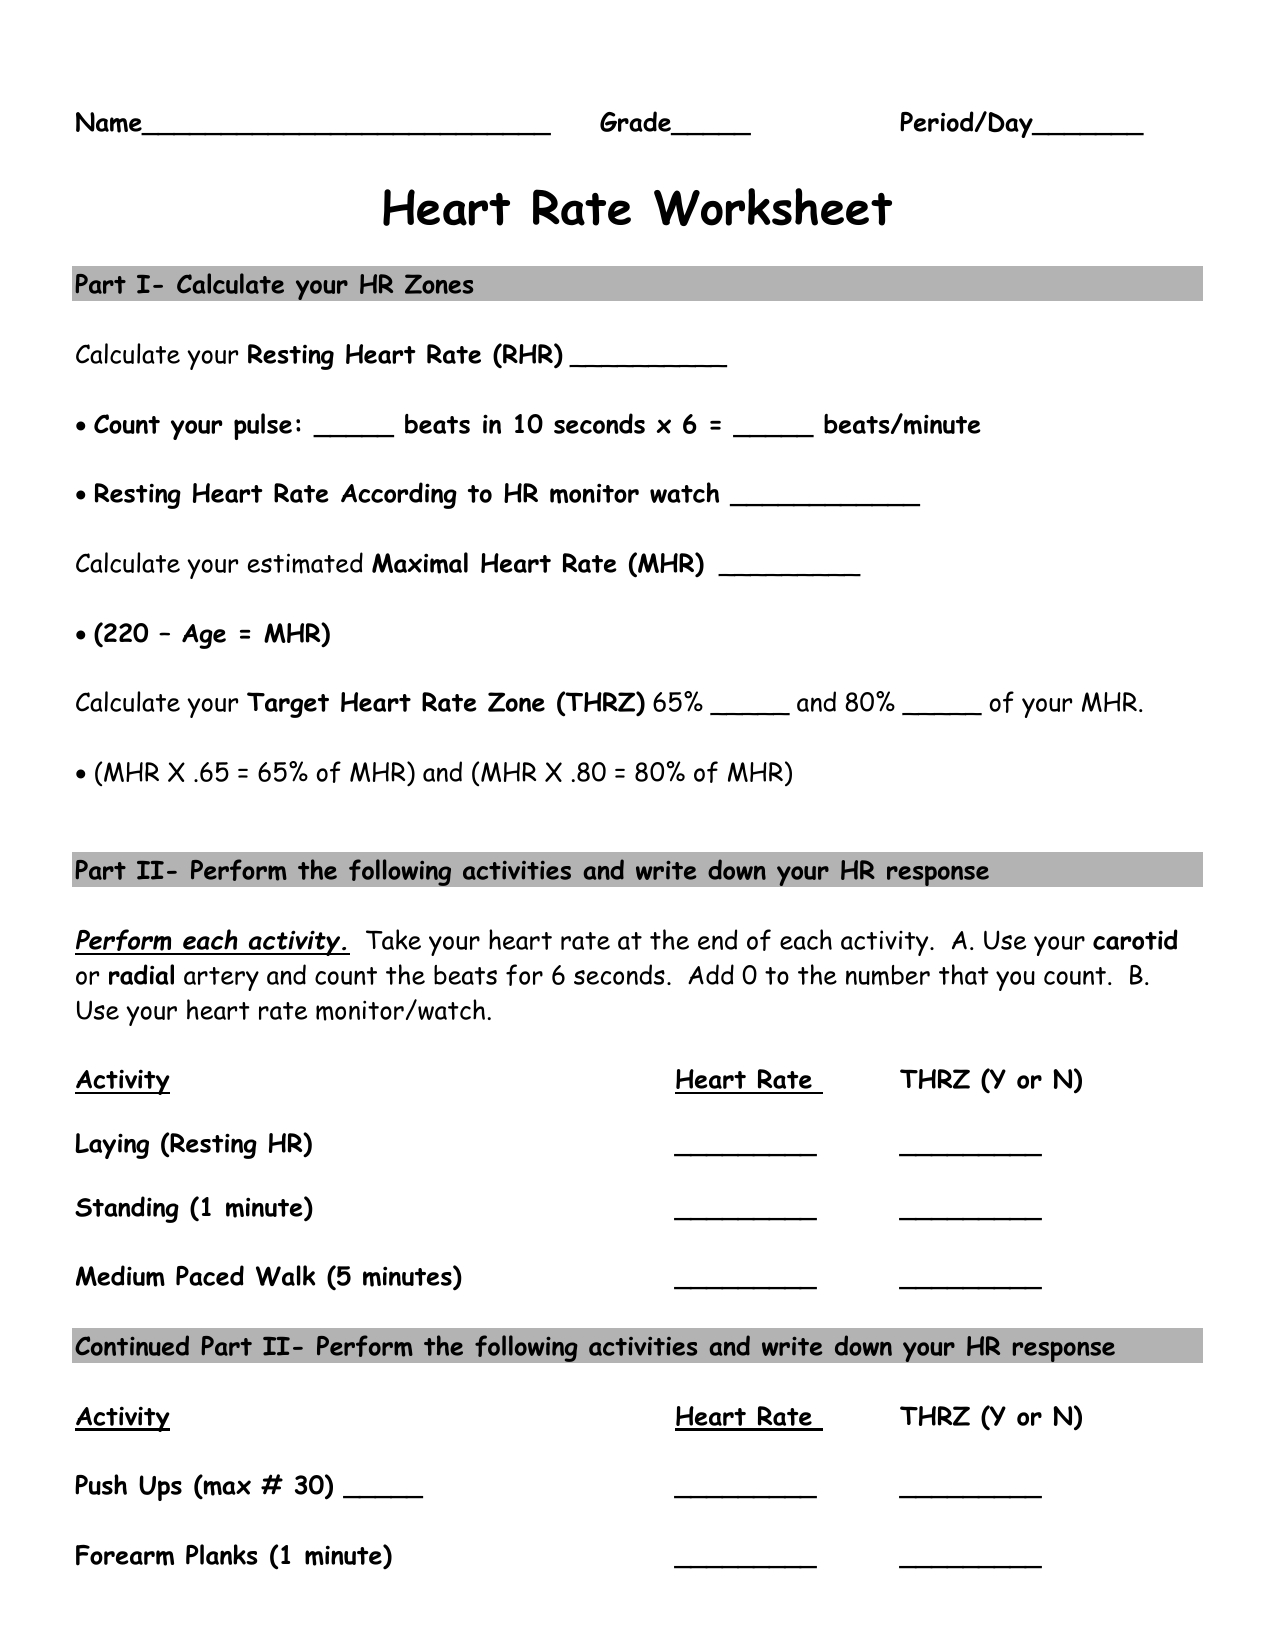 Heart Rate Activity Worksheet - Belle Vernon Area School District - Free Printable Health Worksheets For Middle School